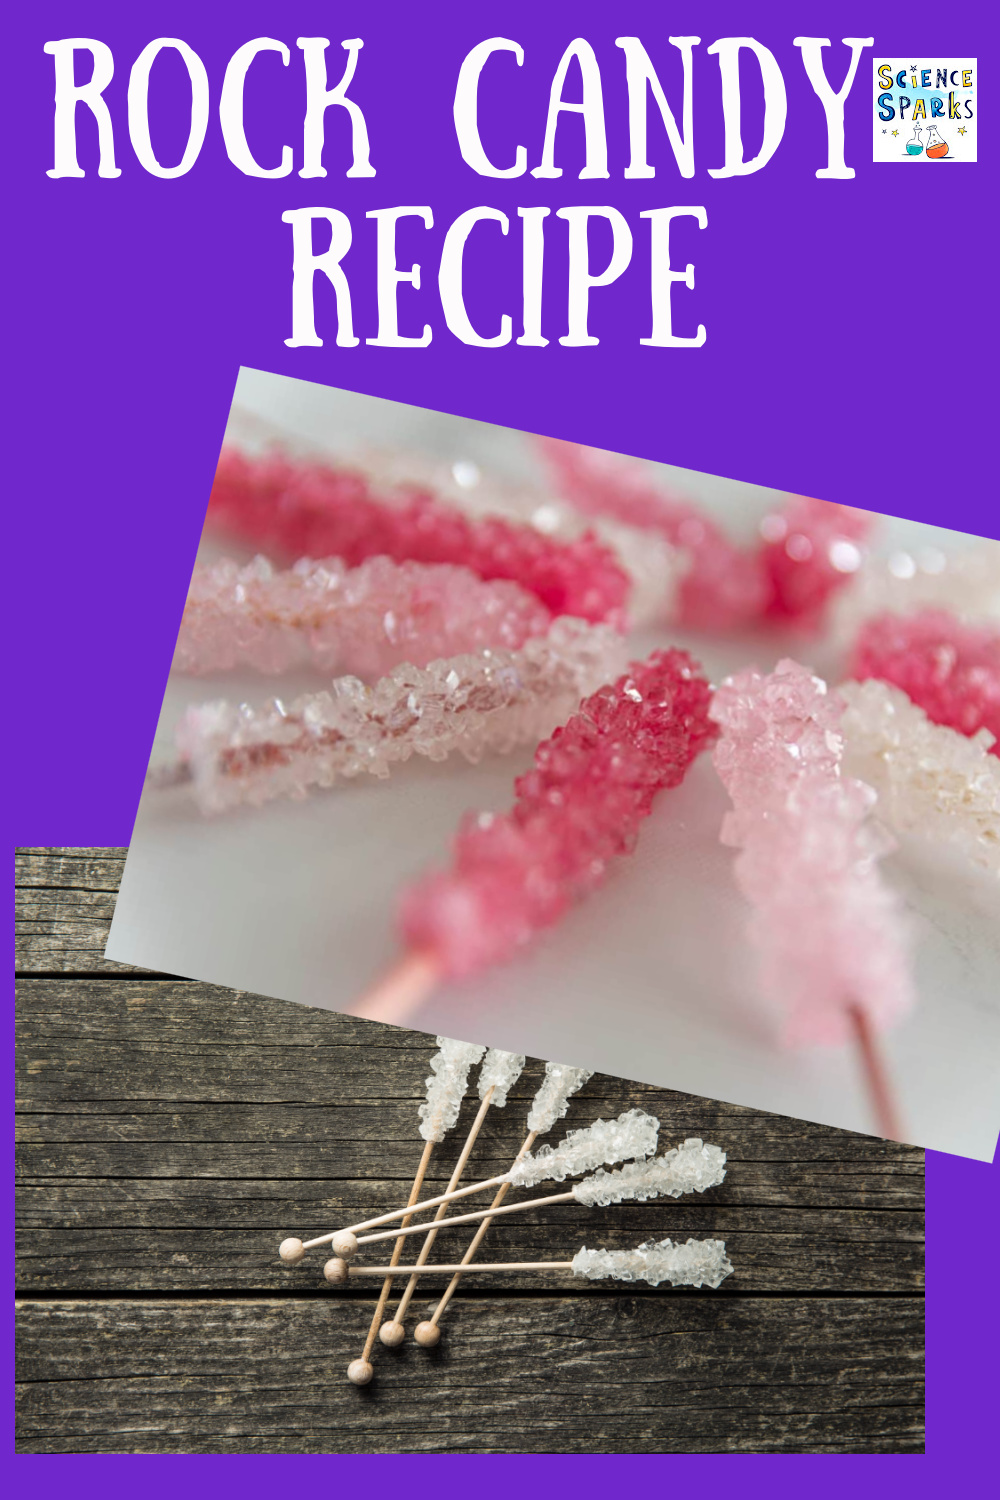 How to make Rock Candy/Sugar Crystals - Edible Science